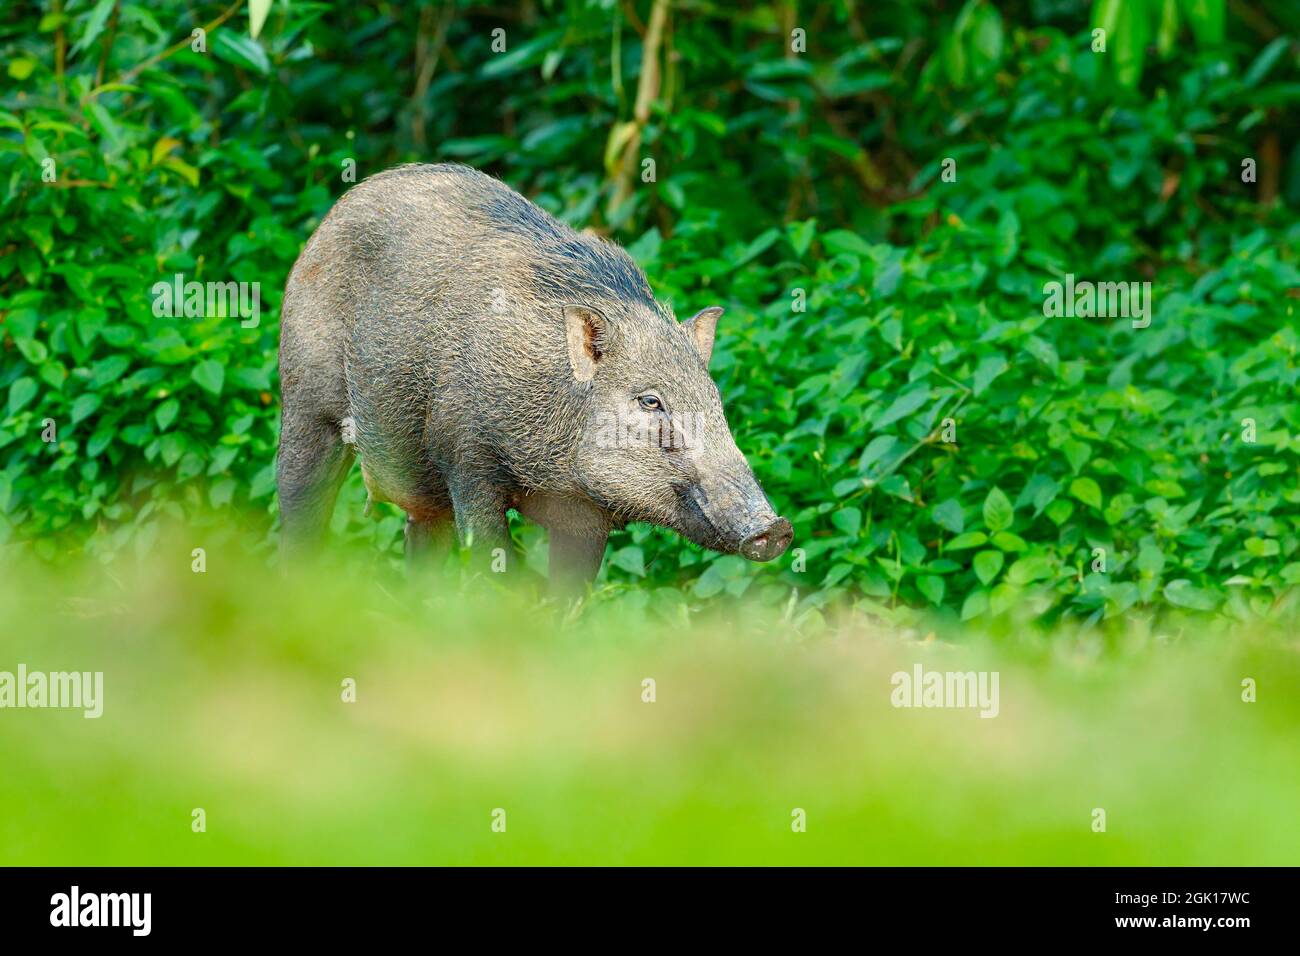 A female Wild Boar ventures out of the tree cover in a park, Singapore. Stock Photo